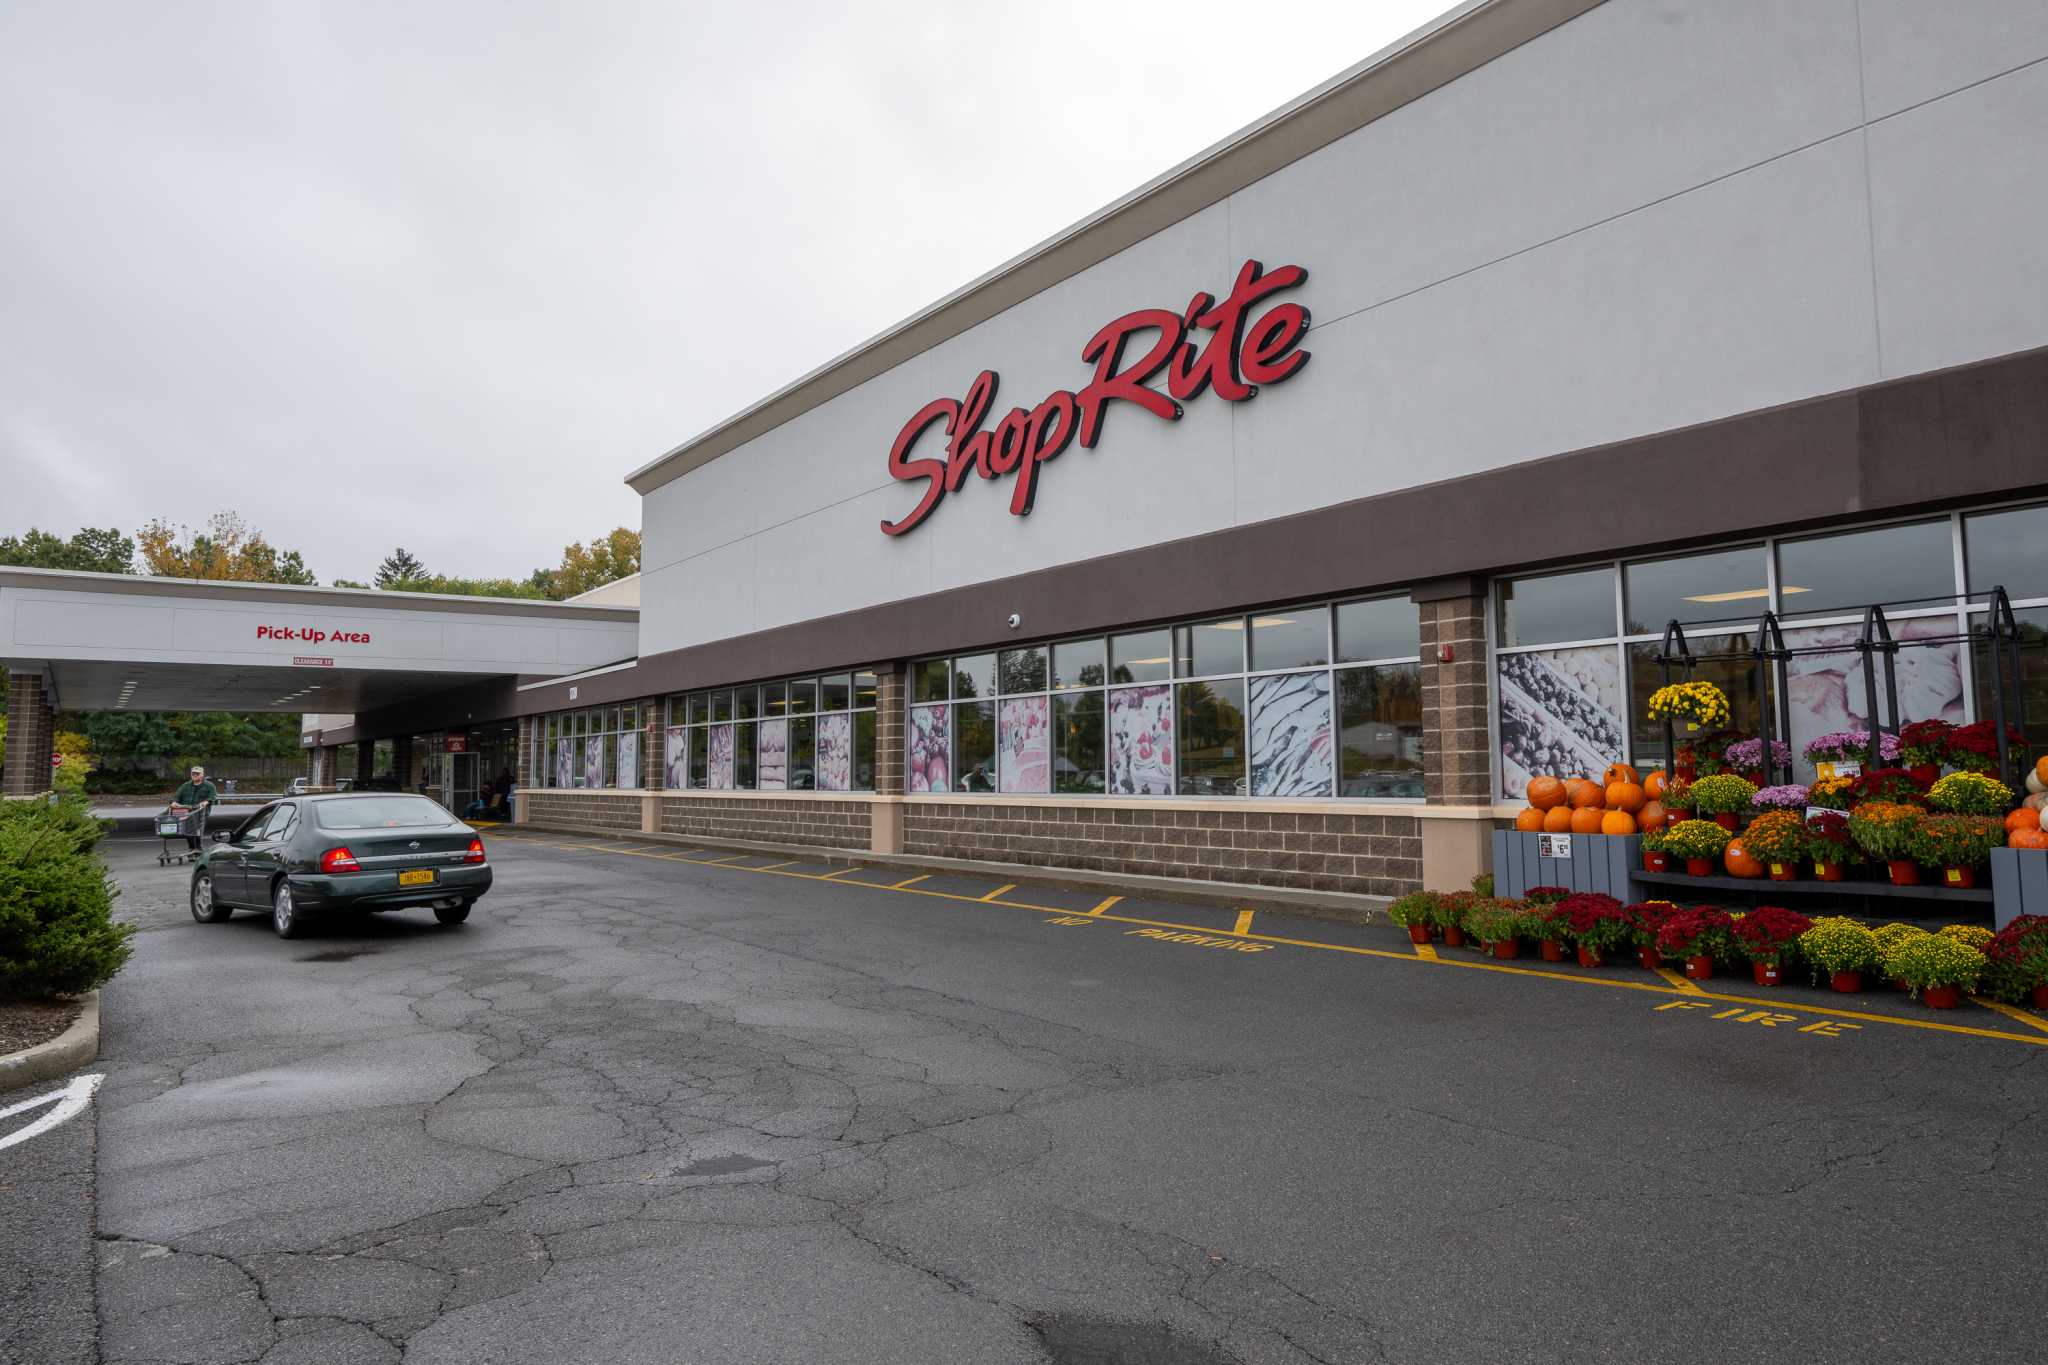 ShopRite Closing 5 Stores in Upstate New York Due to Disappointing